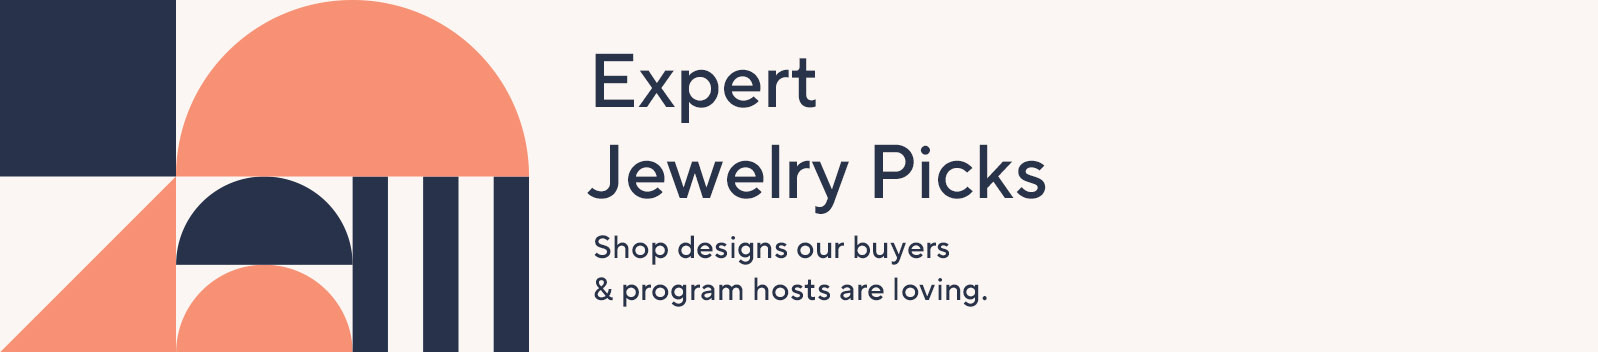 Expert Jewelry Picks - Shop designs our buyers & program hosts are loving.